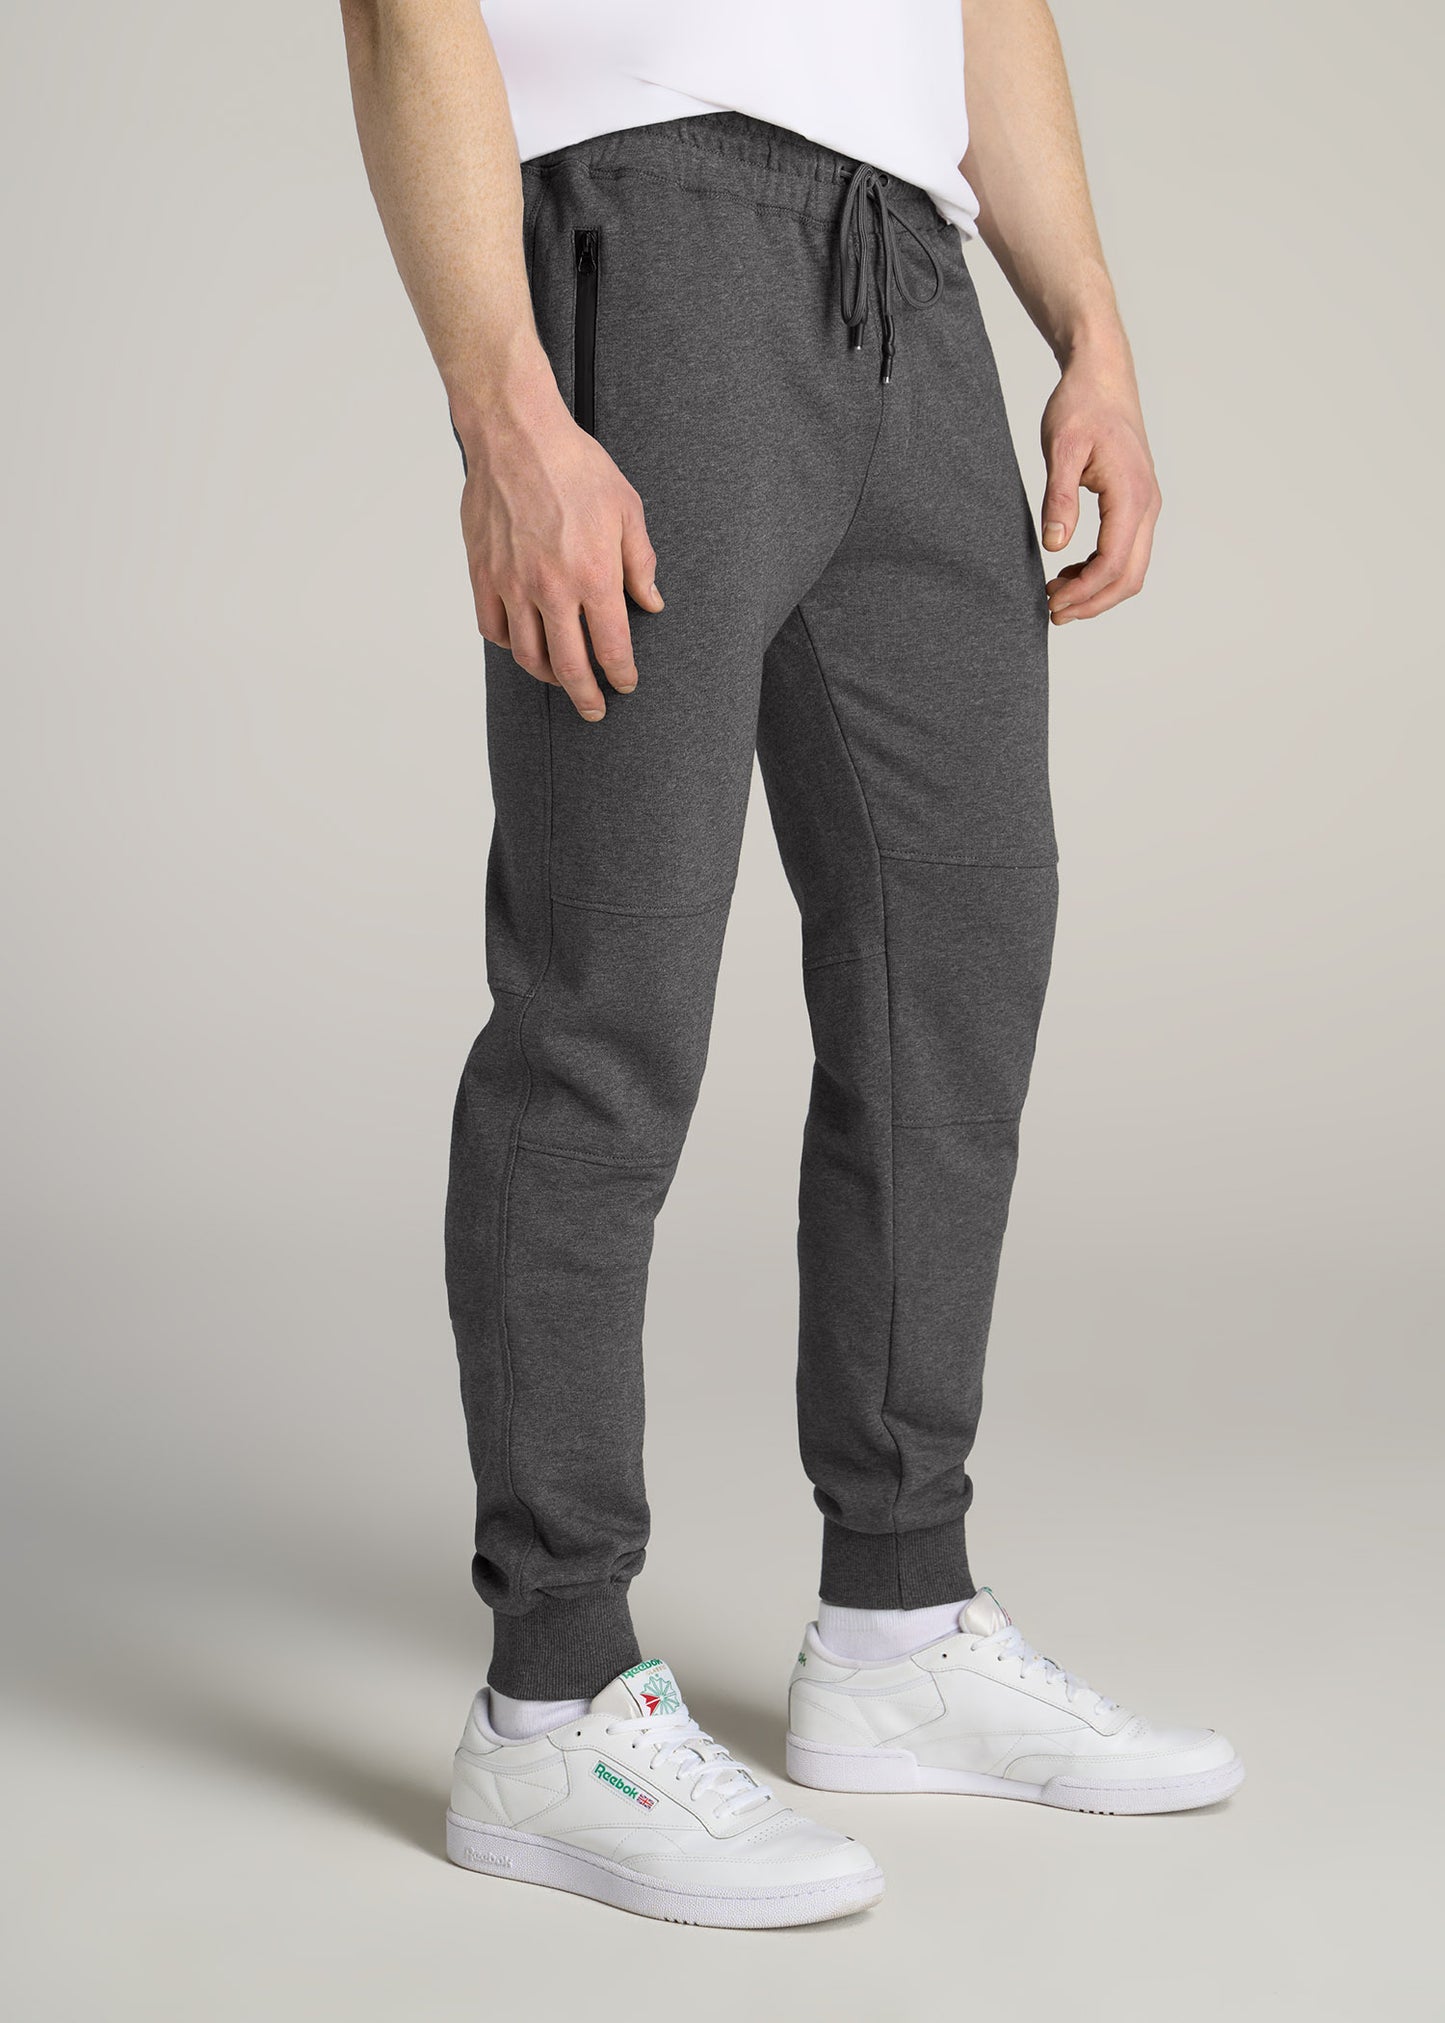 Wearever French Terry Men's Tall Joggers in Charcoal Mix